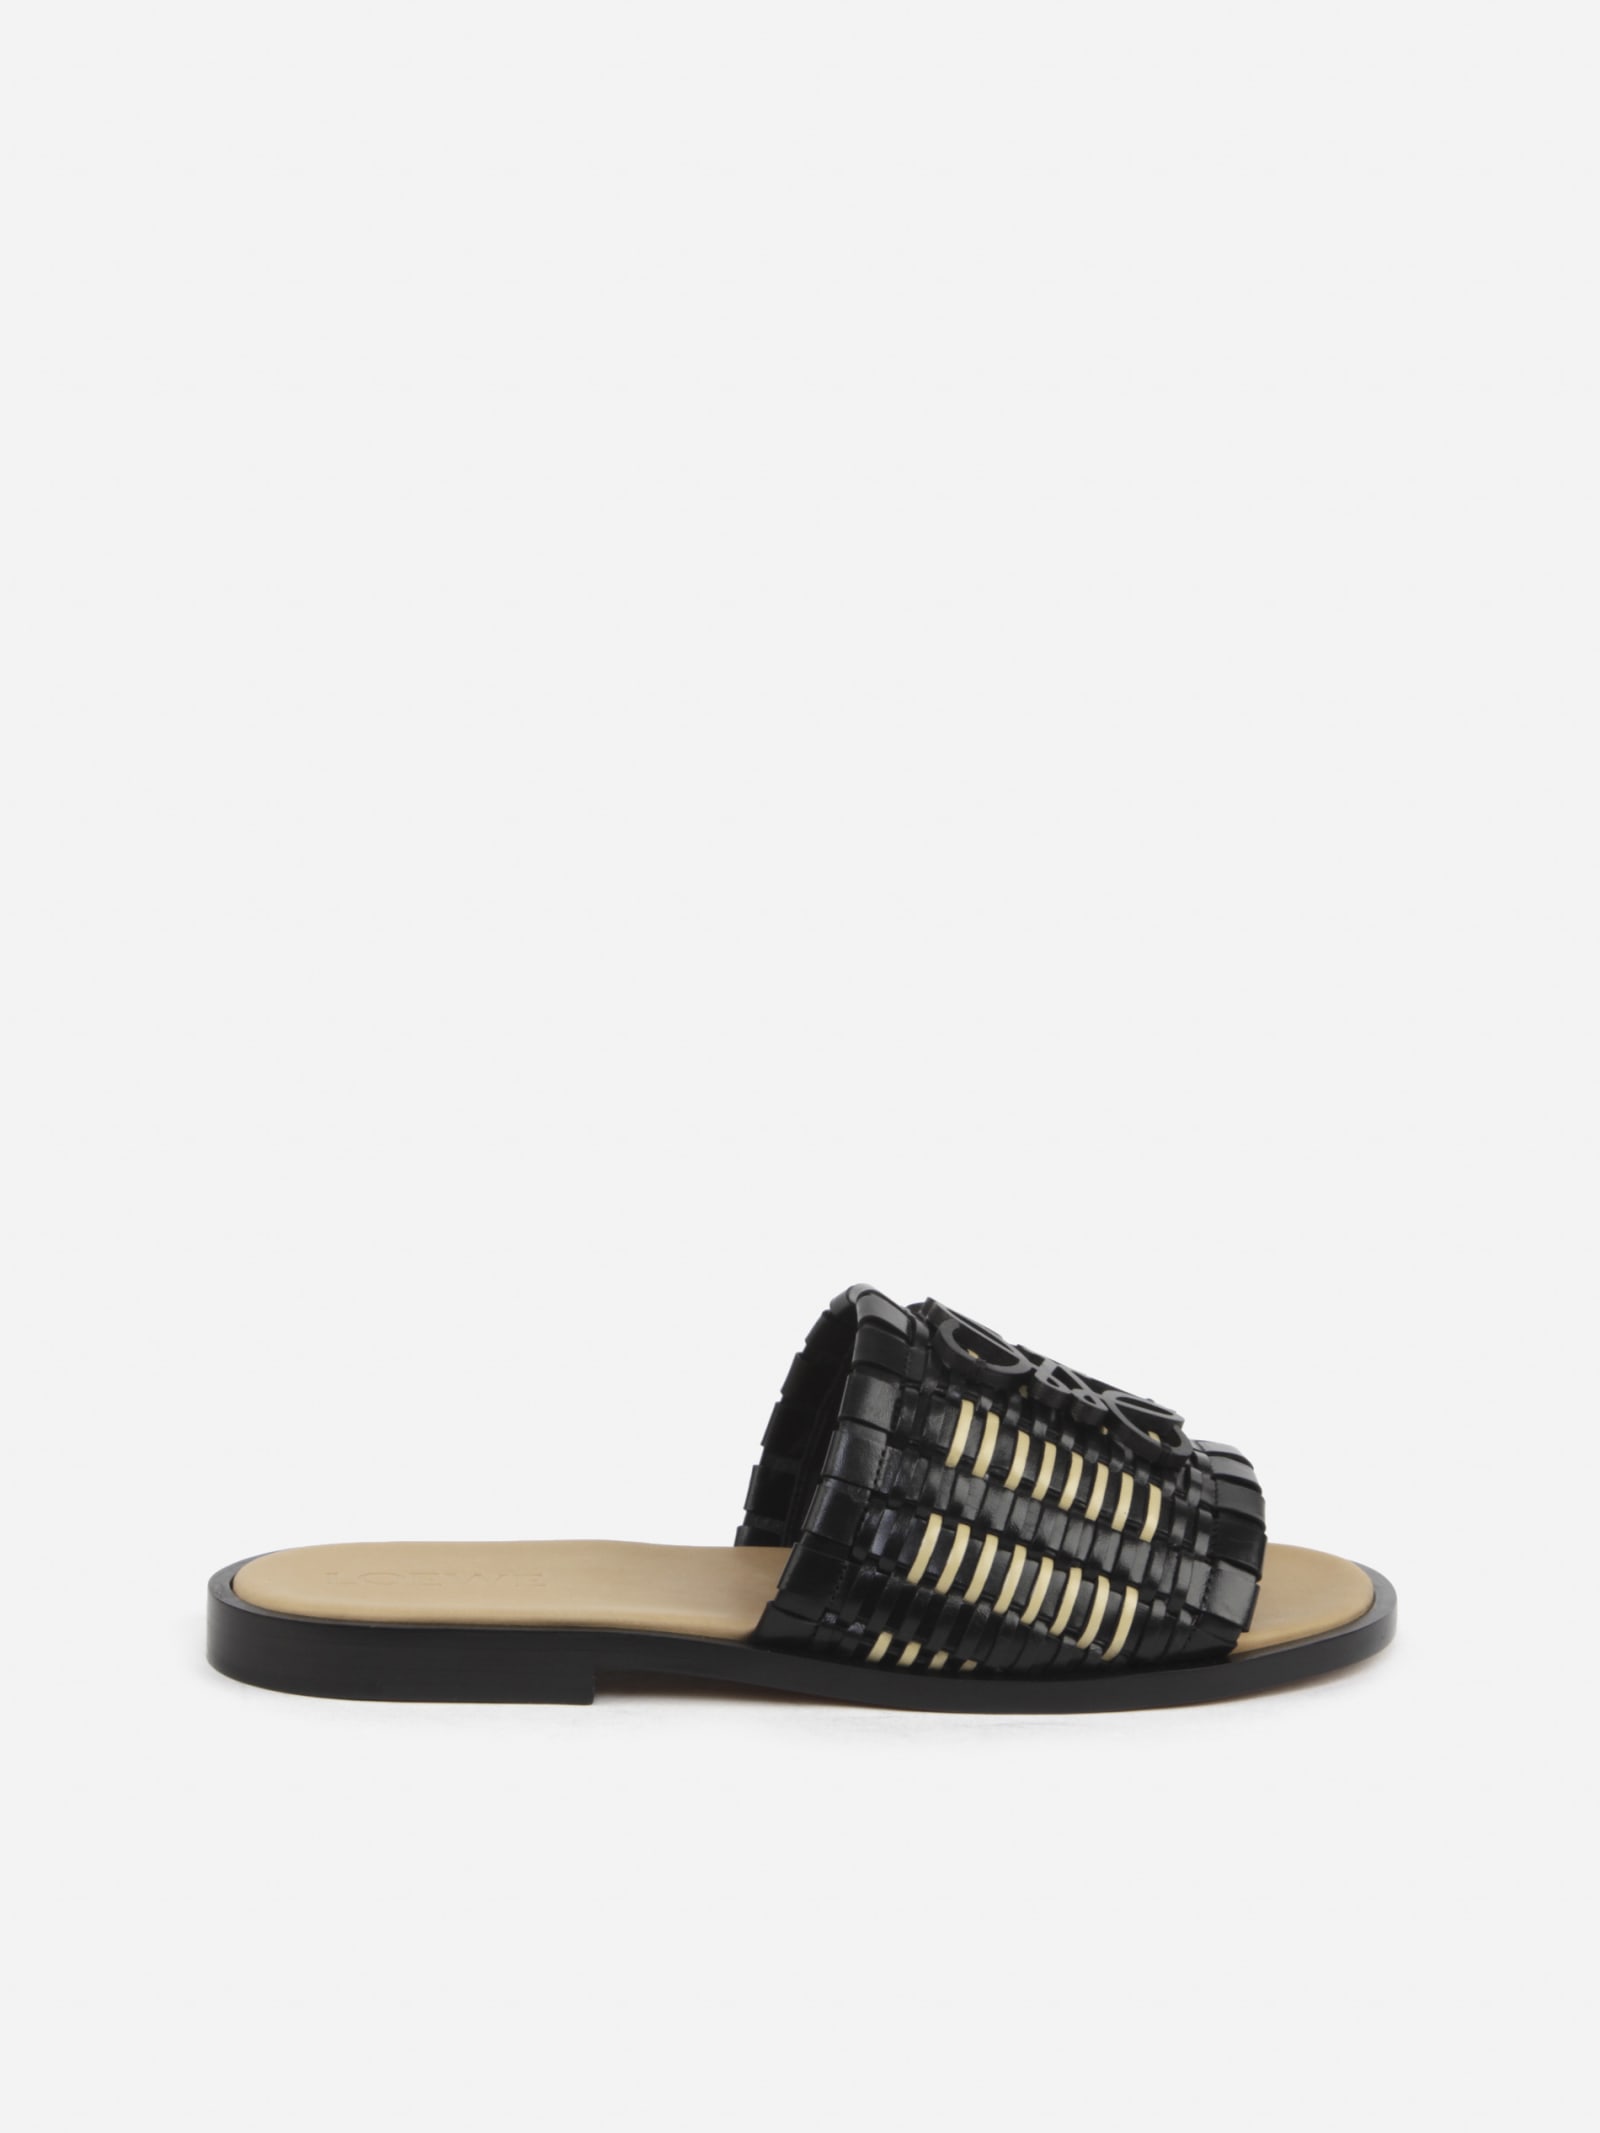 Loewe Slides Sandals Made Of Woven Leather With Anagram